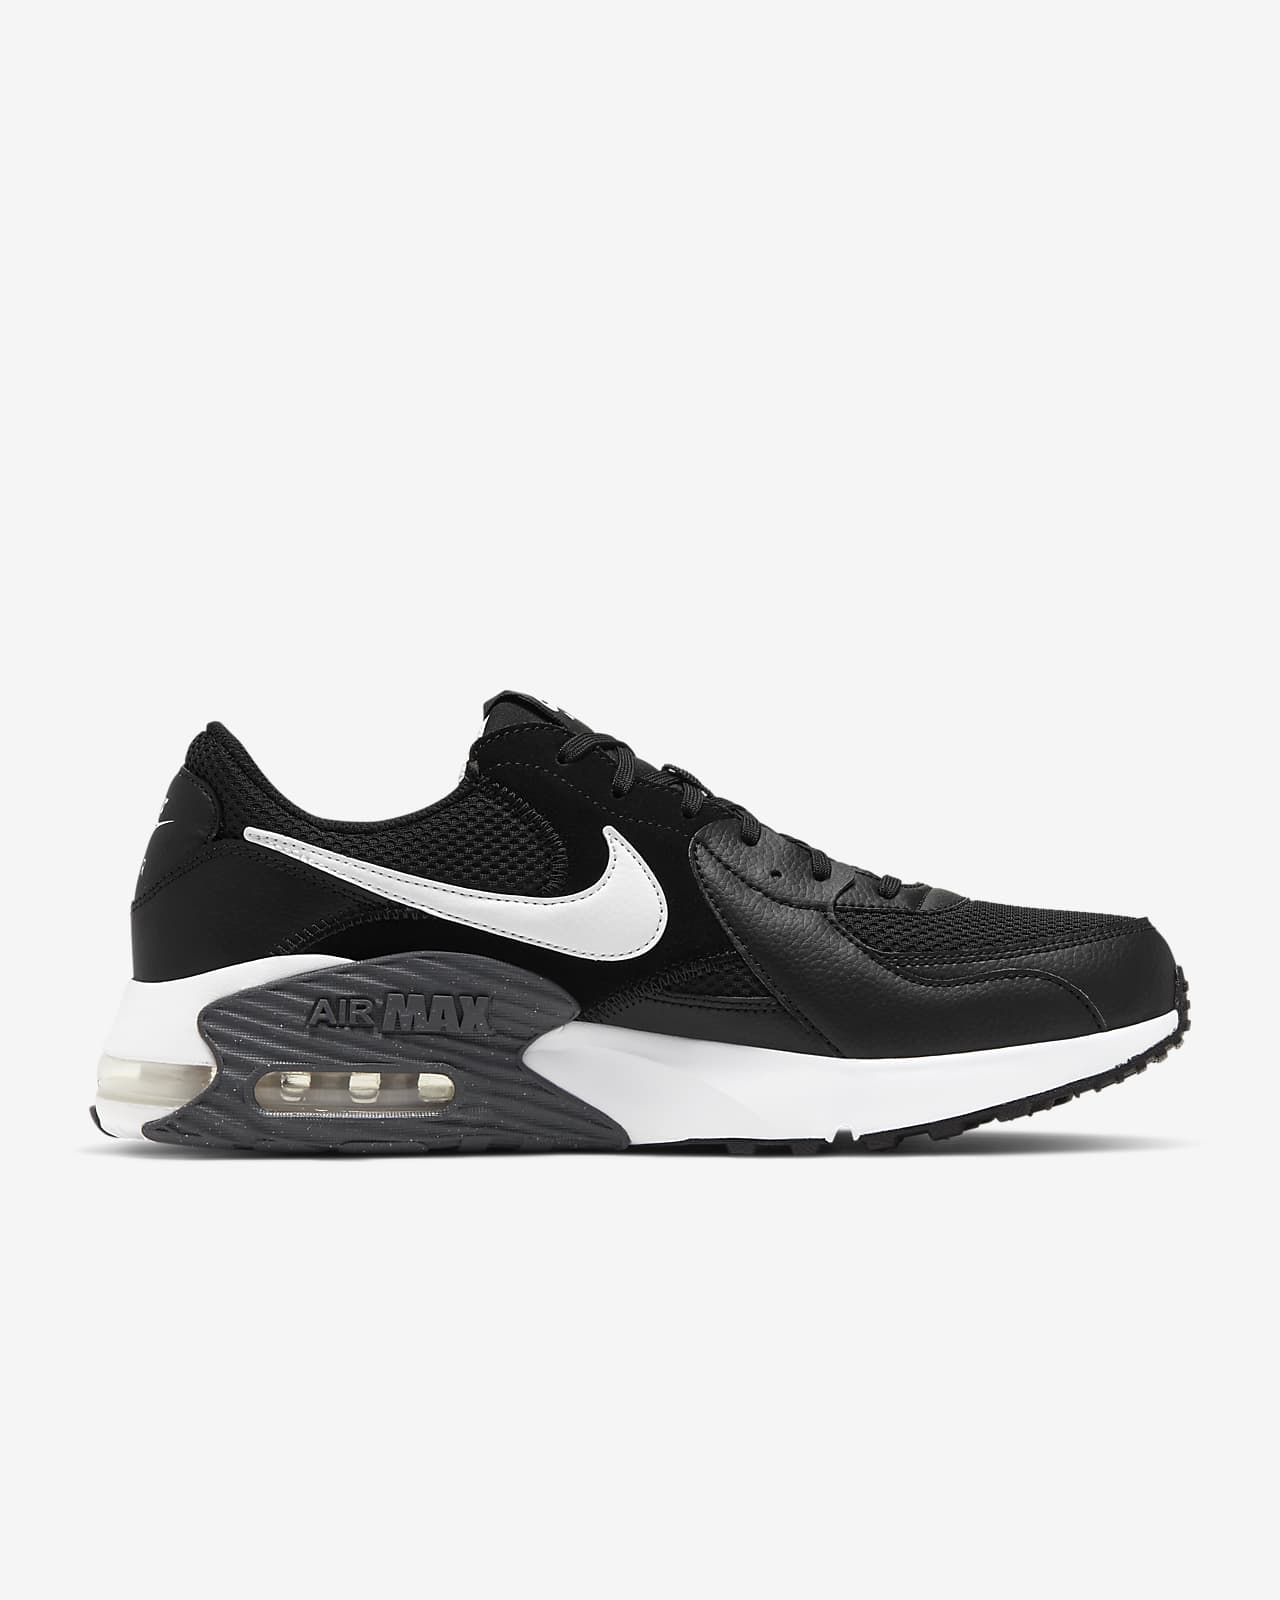 chaussure homme nike max